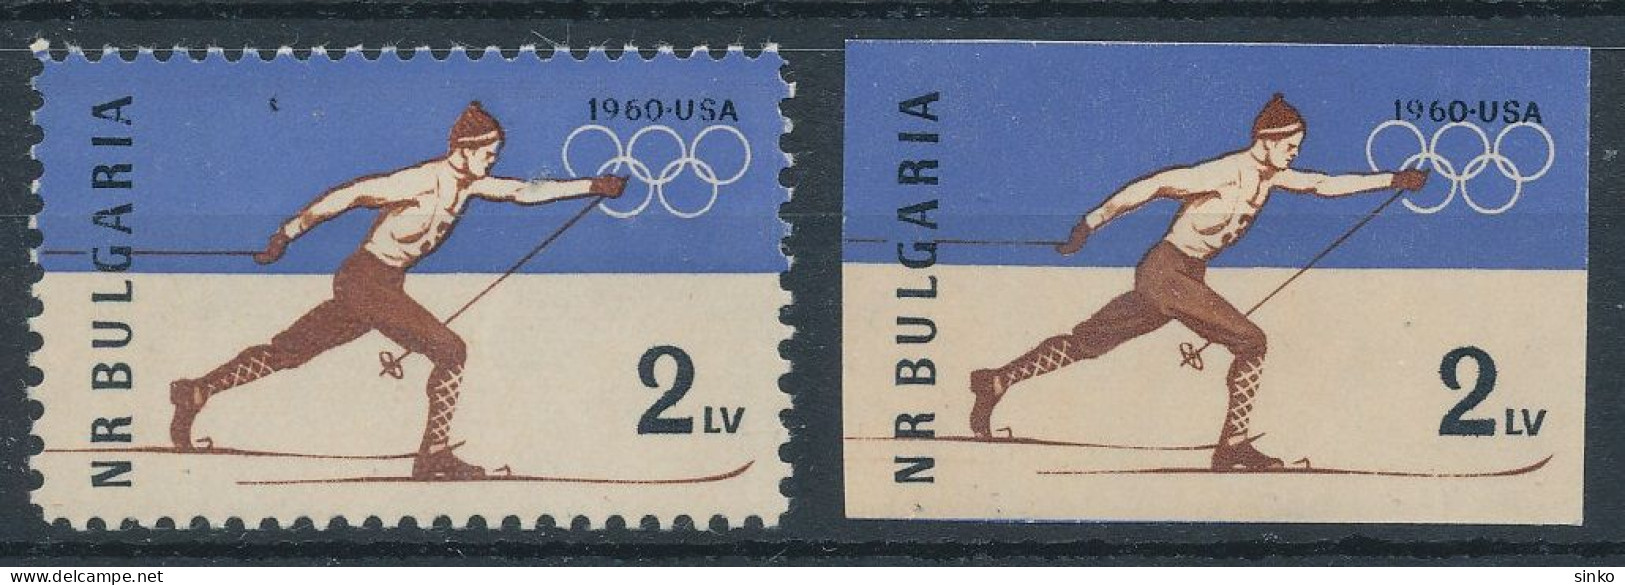 1960. Bulgaria - Olympic Games - Hiver 1960: Squaw Valley